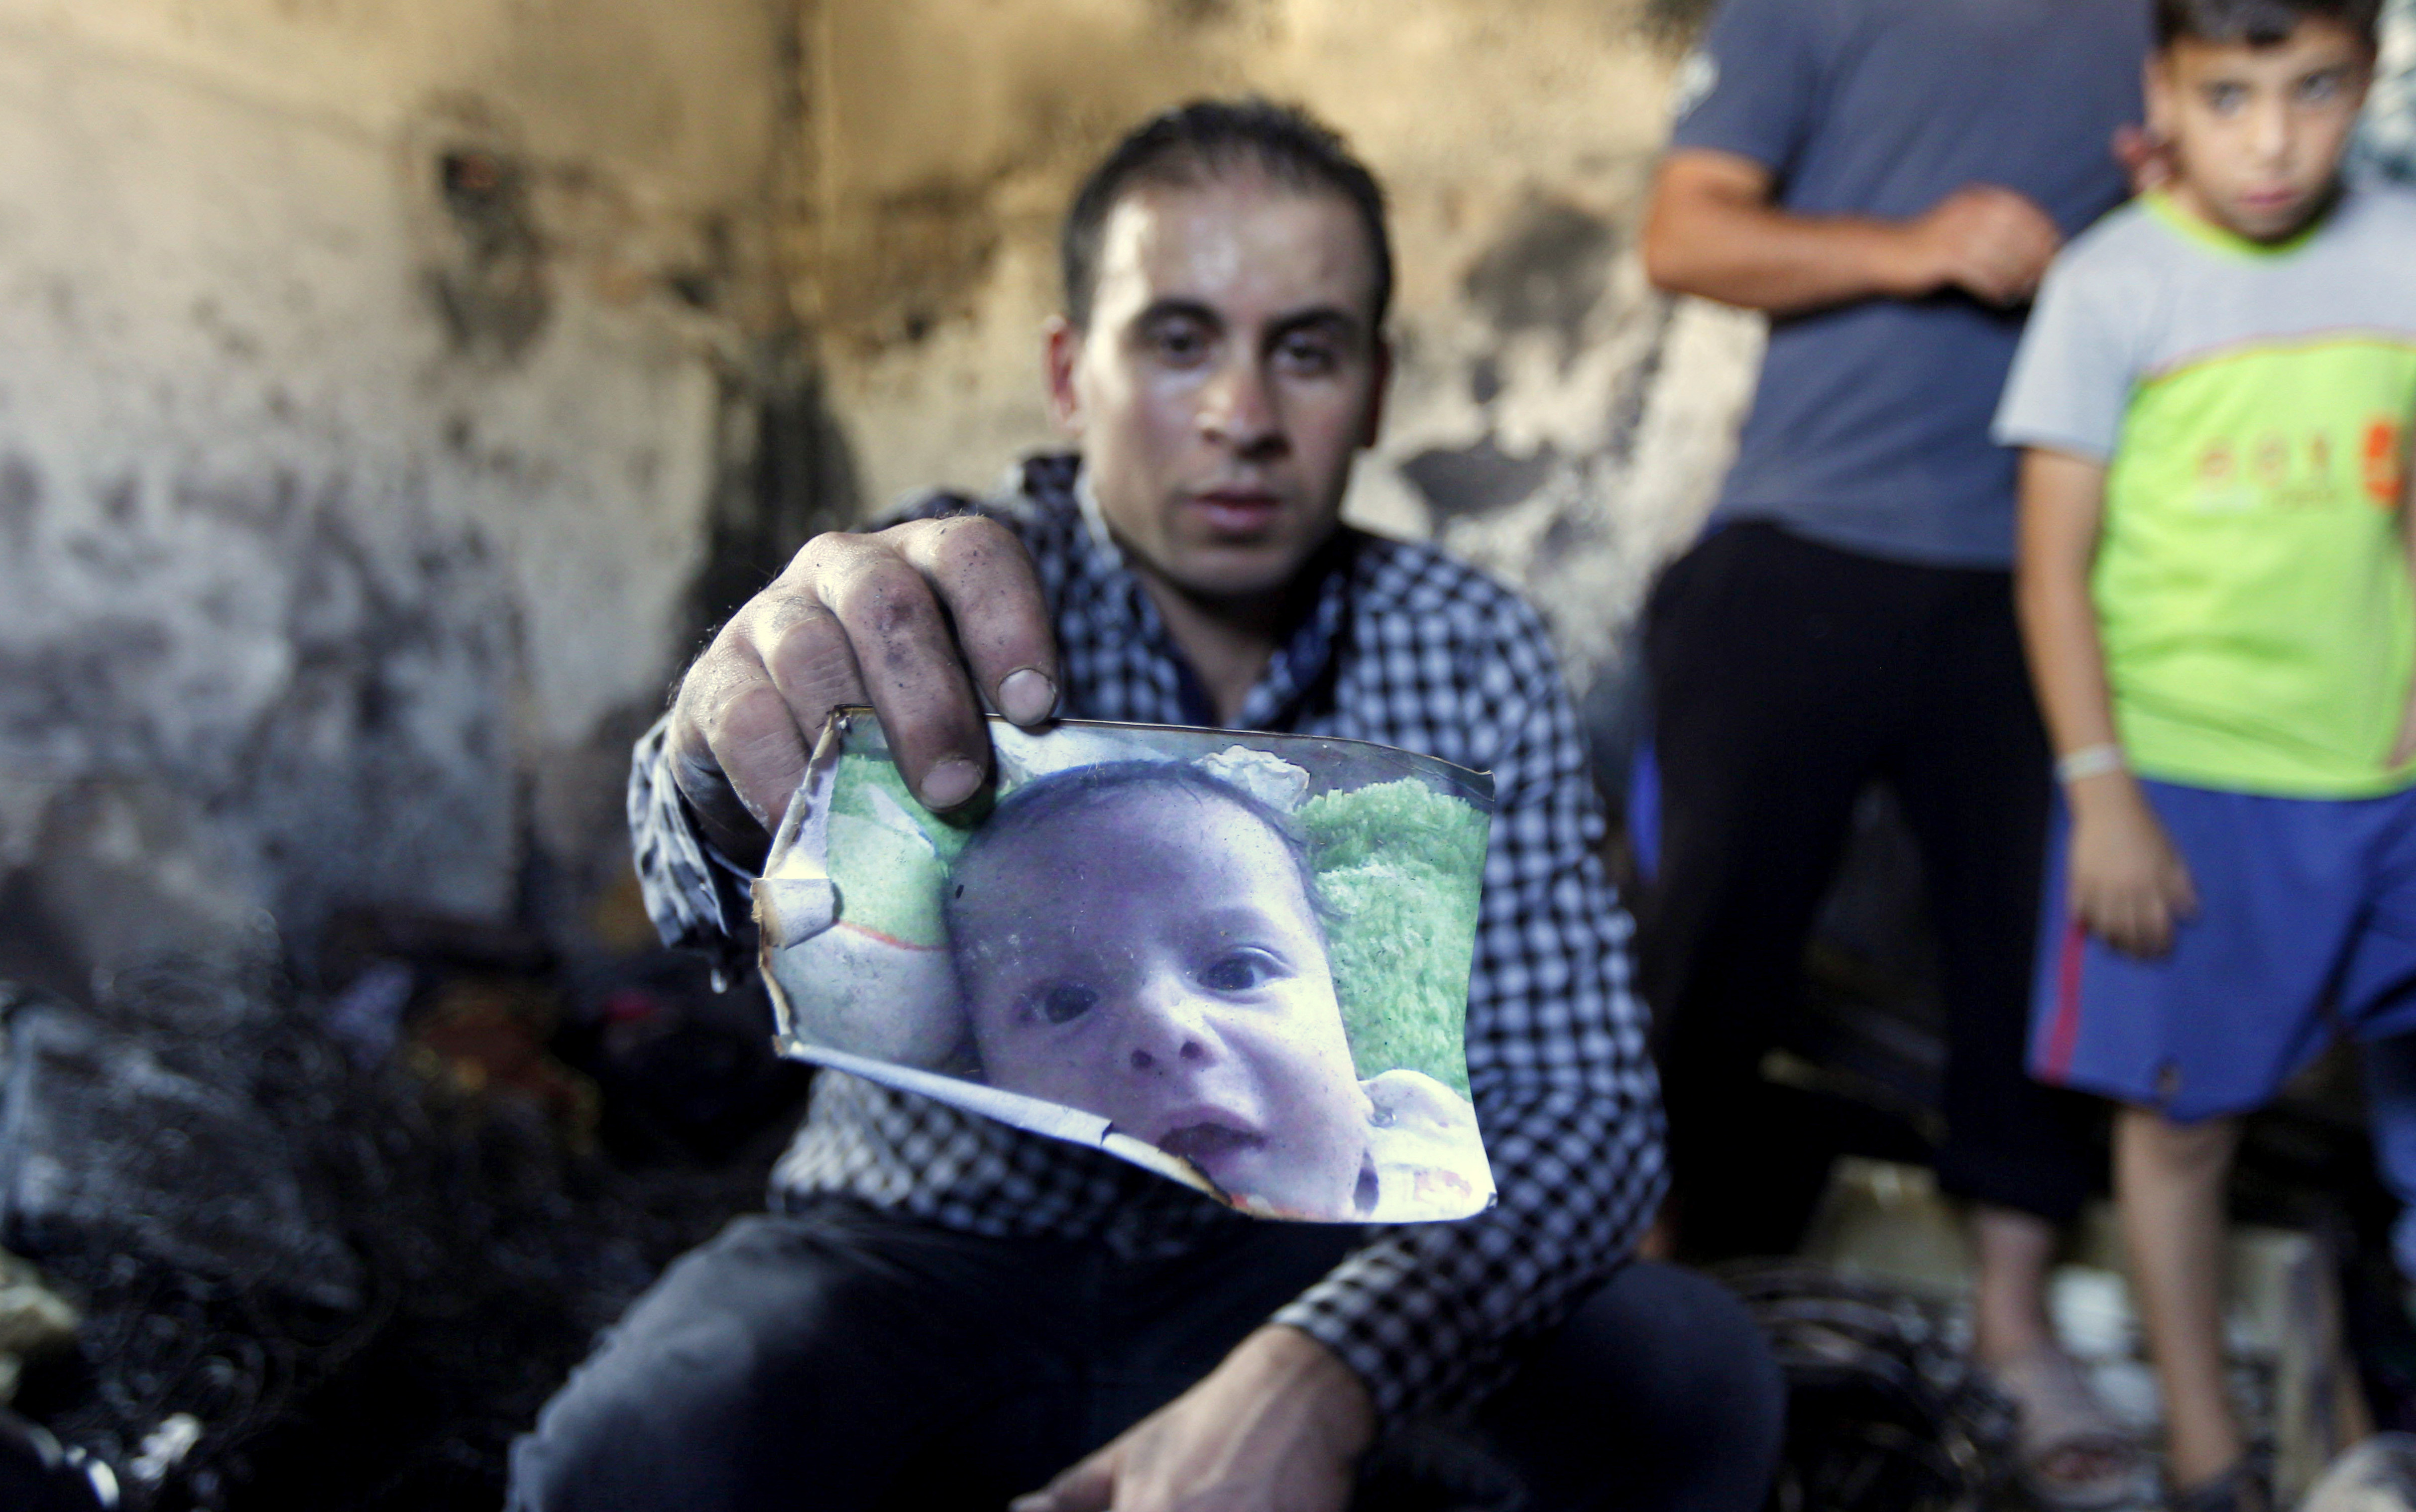 A relative holds up a photo of a one-and-a-half year old boy, Ali Dawabsheh, killed in a house that had been torched in an attack by Jewish extremists in Duma village near the West Bank city of Nablus, Friday, July 31, 2015. (AP Photo/Majdi Mohammed)